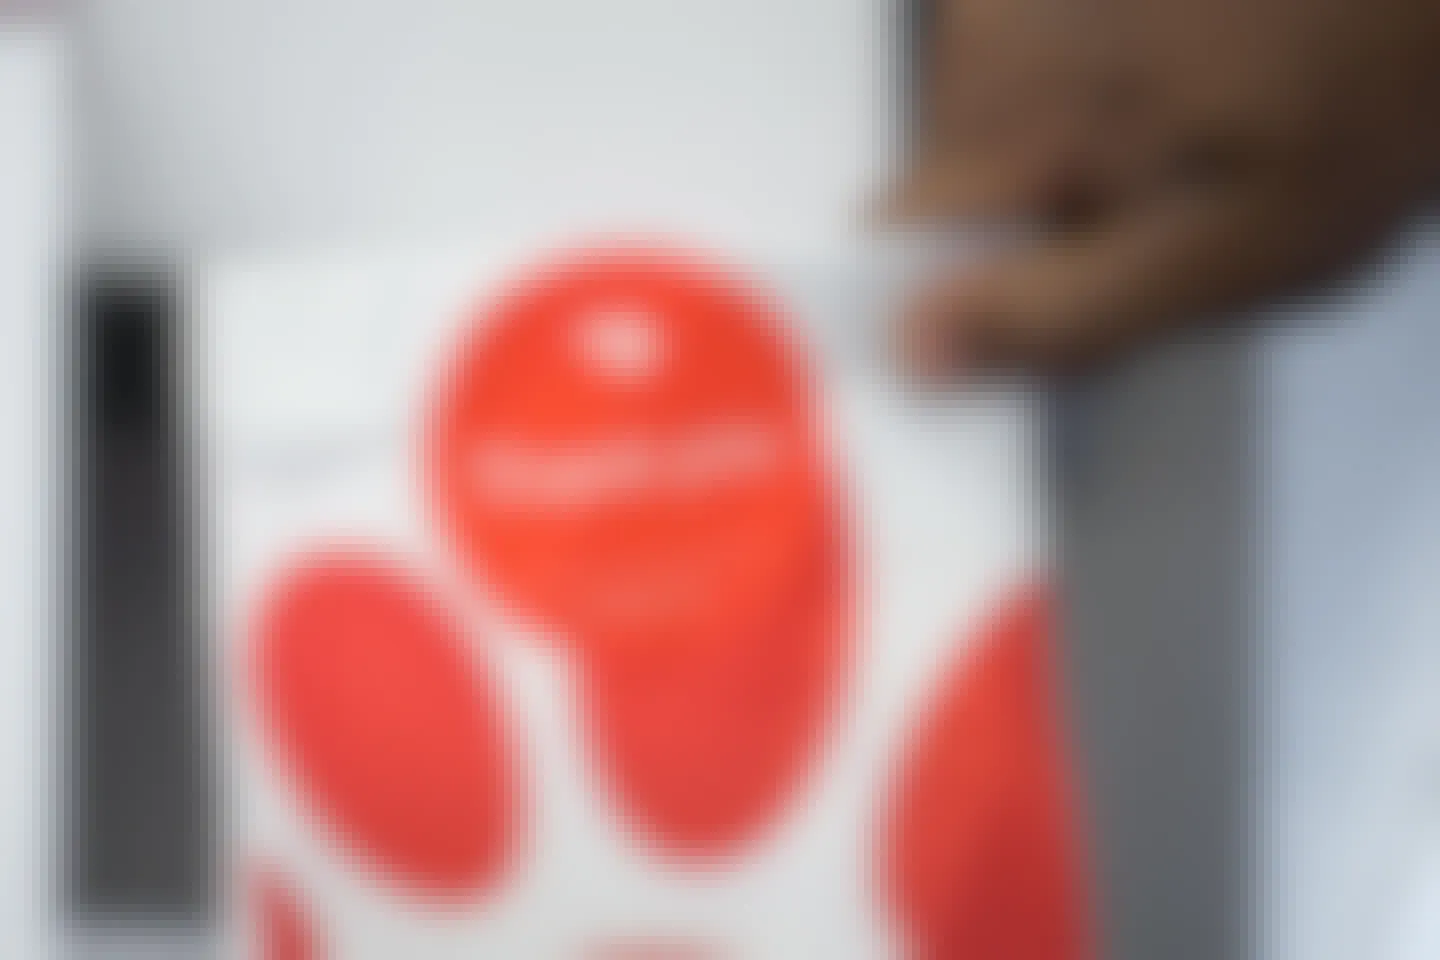 Image of a hand holding a to-go Chick-fil-A bag that says "Thank you